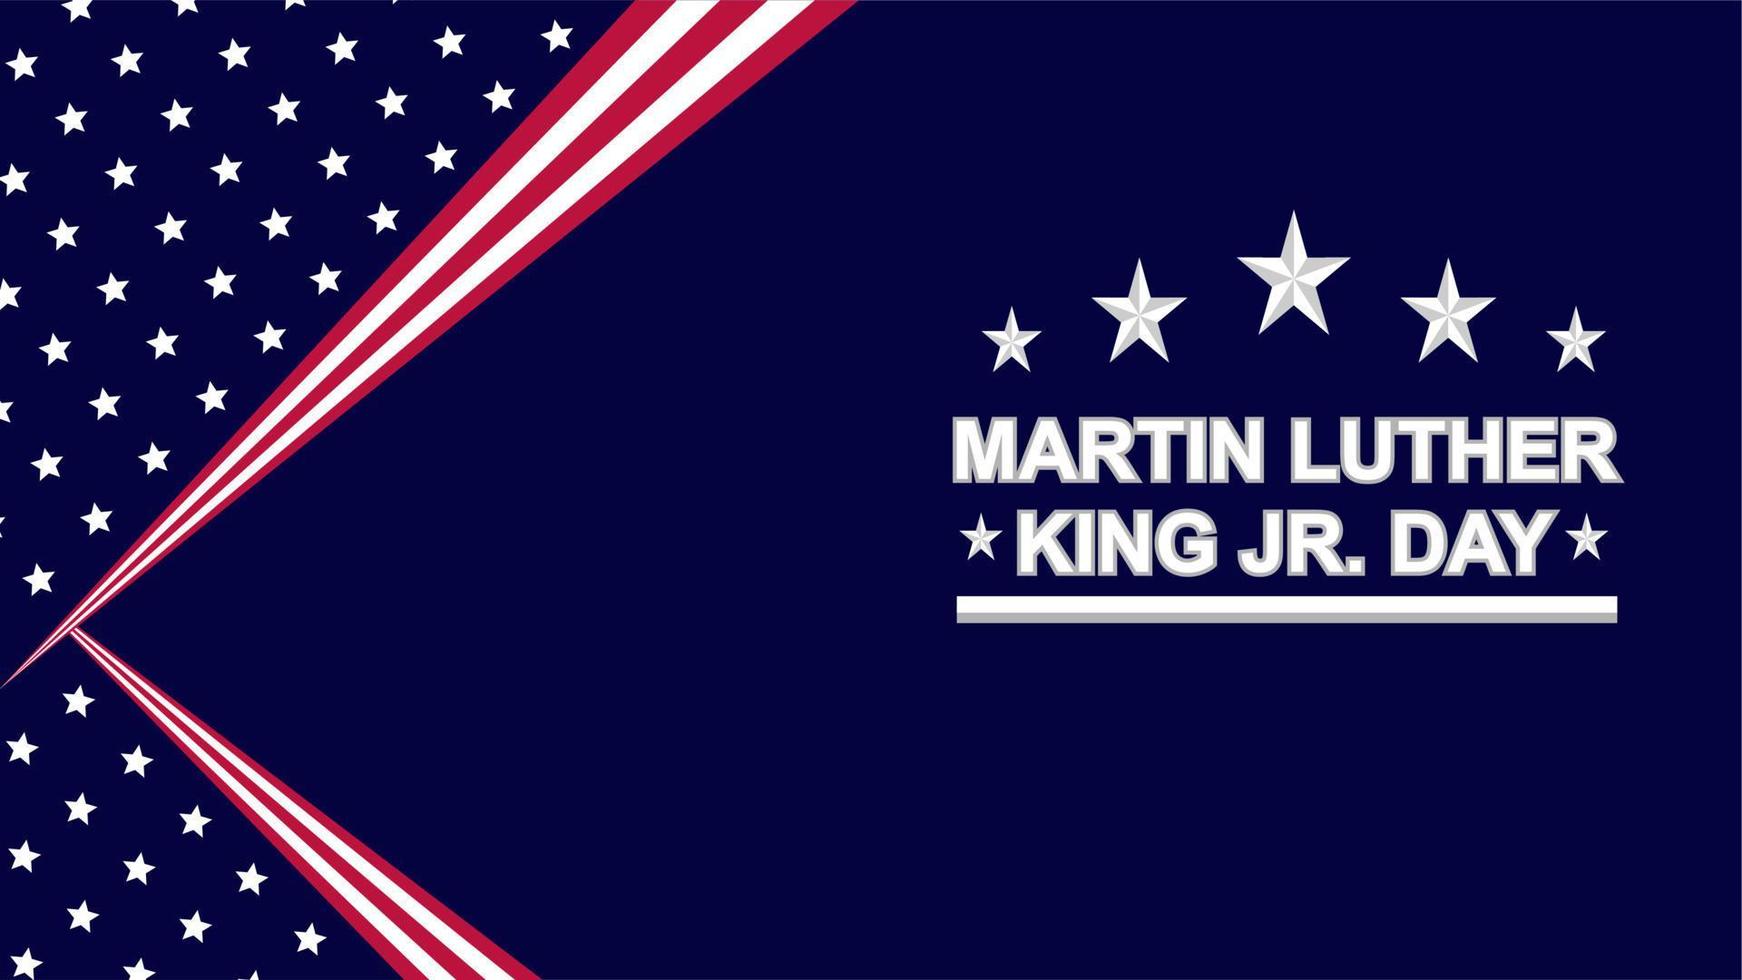 MARTIN LUTHER KING JR DAY ON THE THEME OF USA FLAG BACKGROUND VECTOR